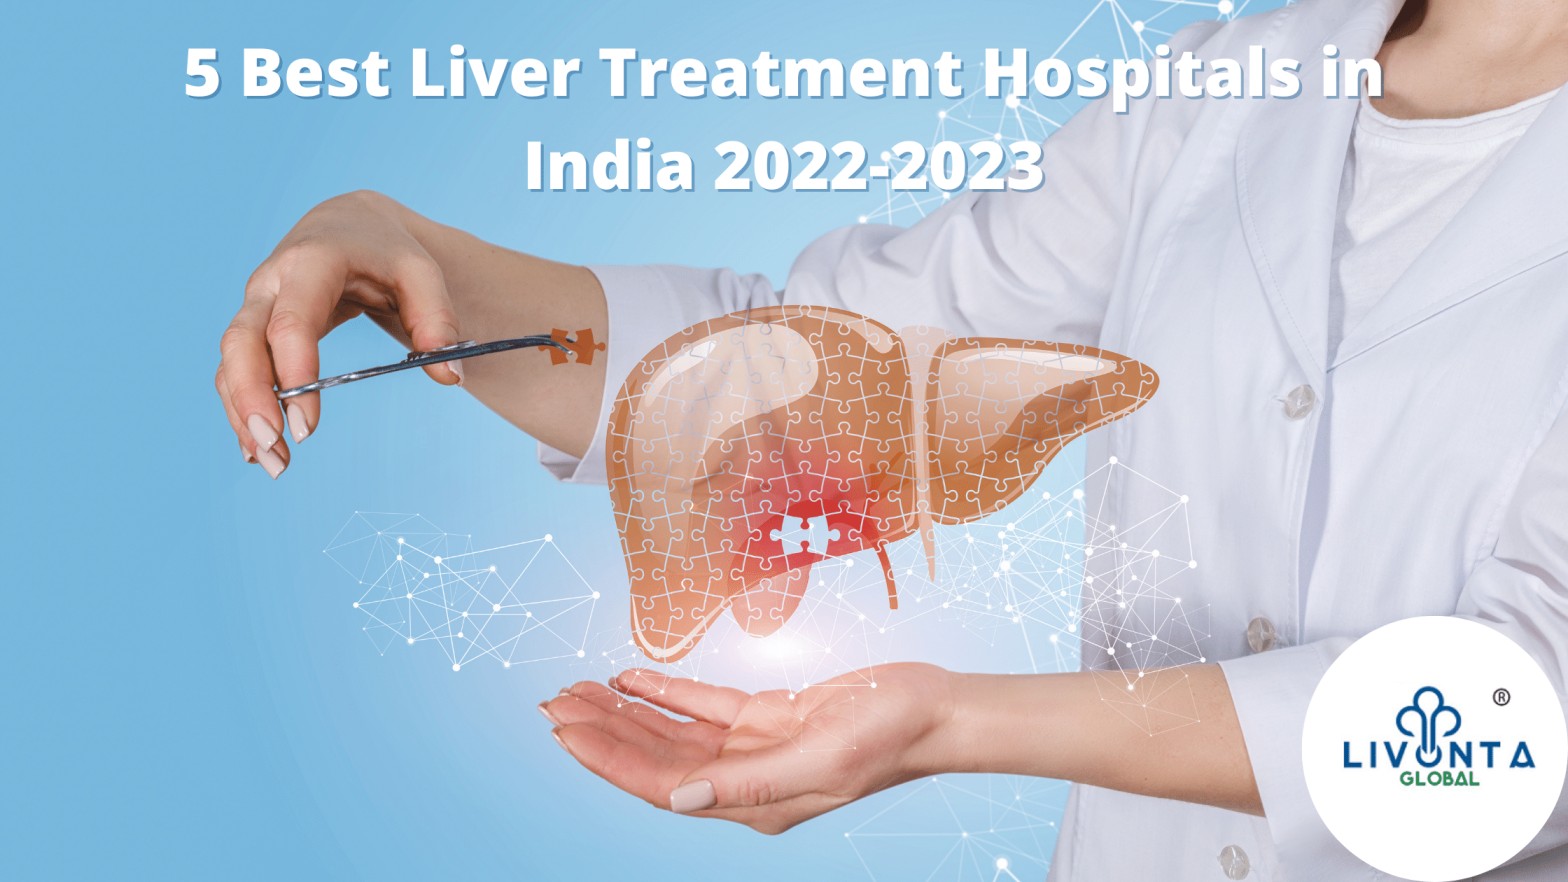 5 Best Liver Treatment Hospitals in India 2022-2023